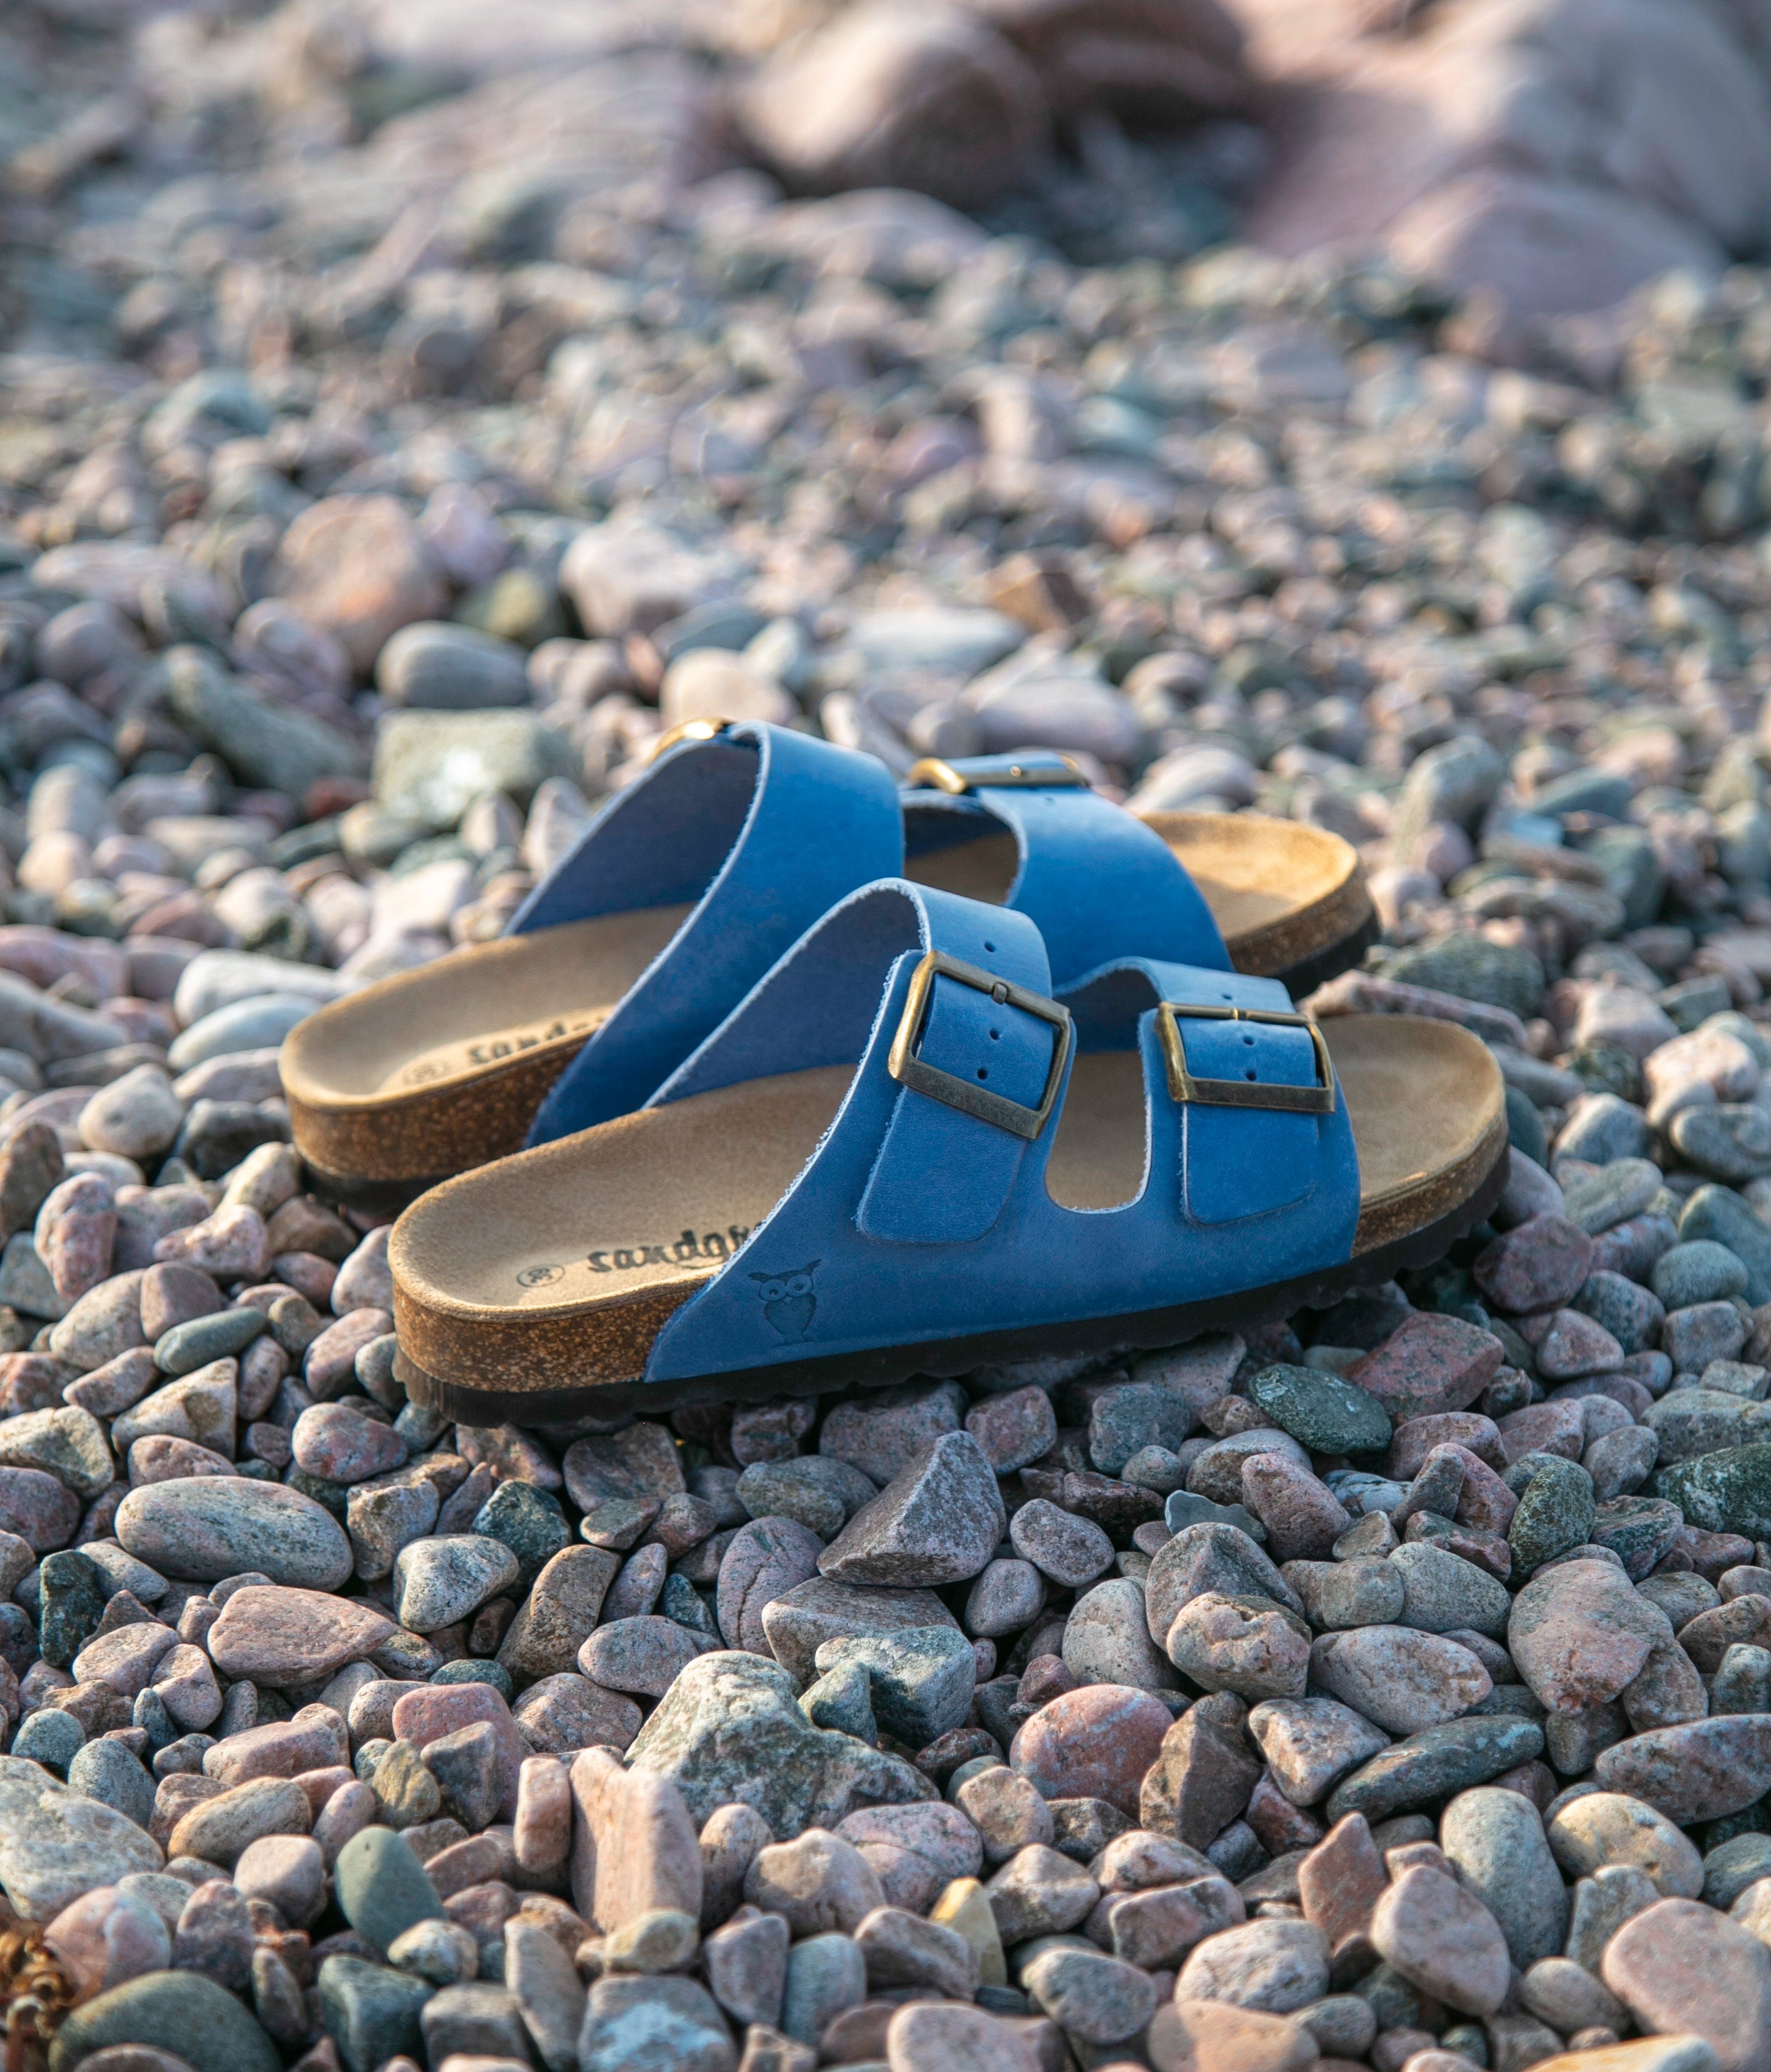 classic cork sandal with two straps in full-grain blue nubuck leather with a blue tint, suede footbed and brass gold studs